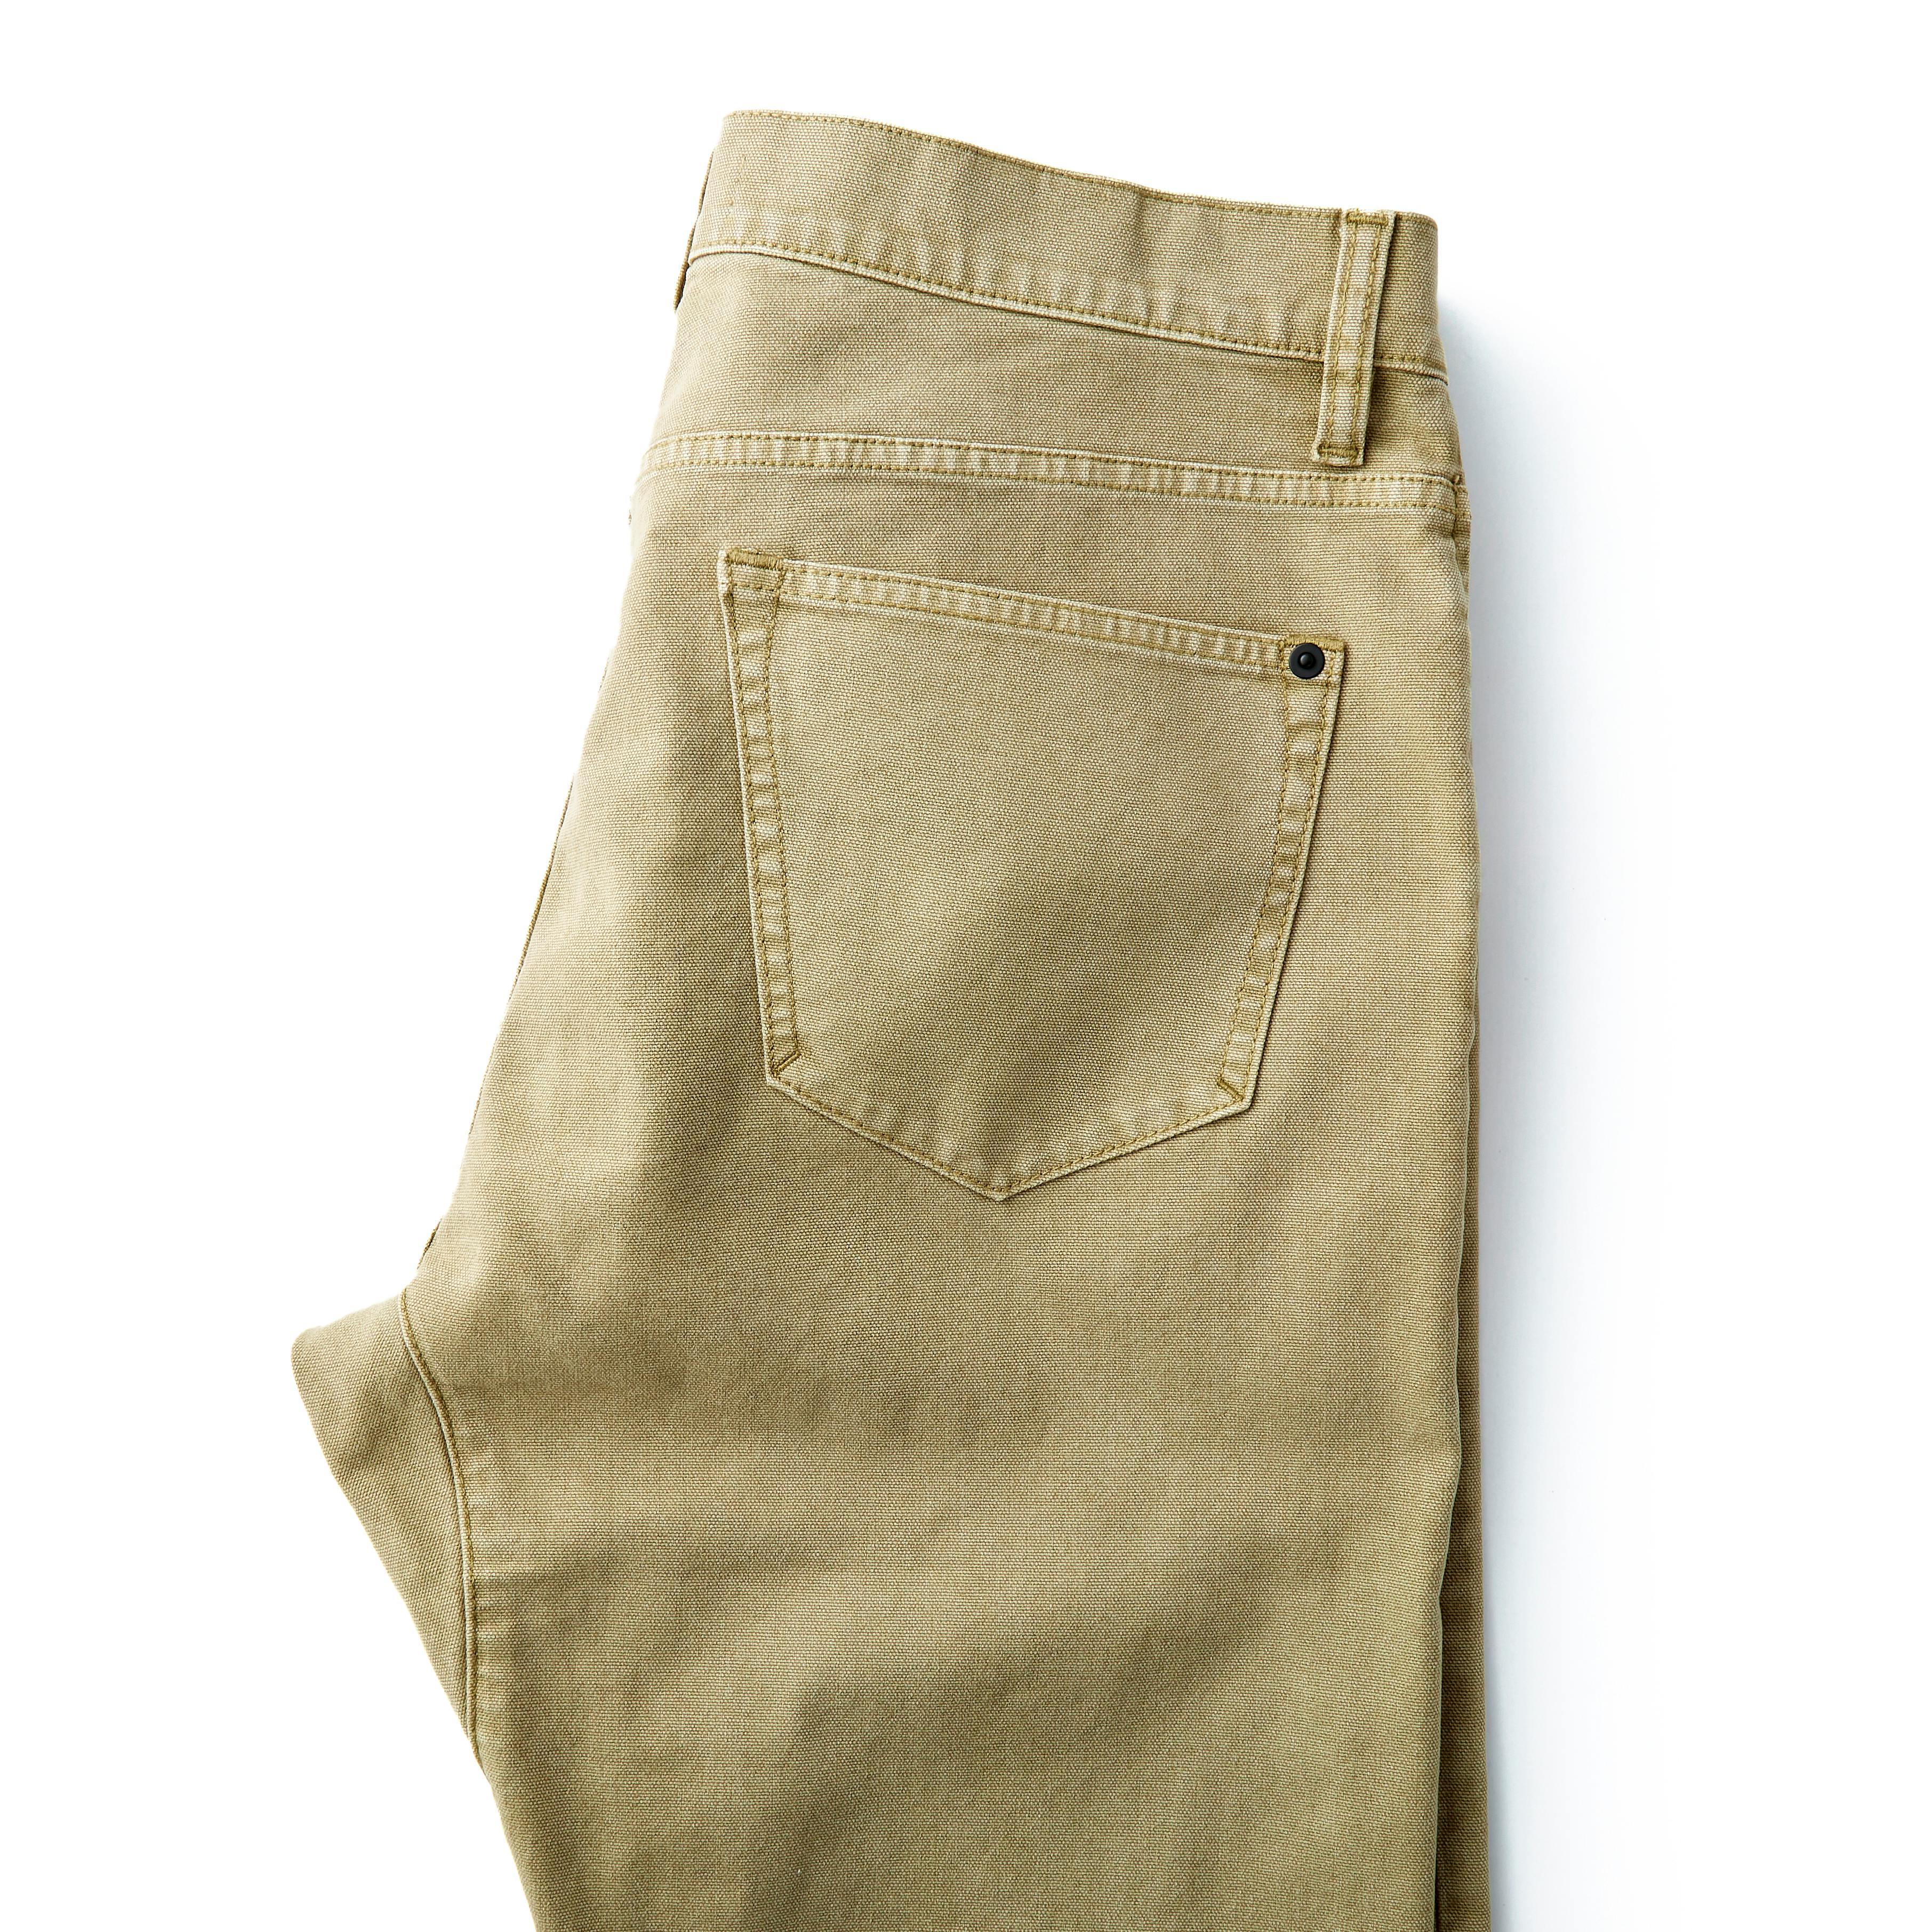 The Slim All Day Pant in Dune Canvas